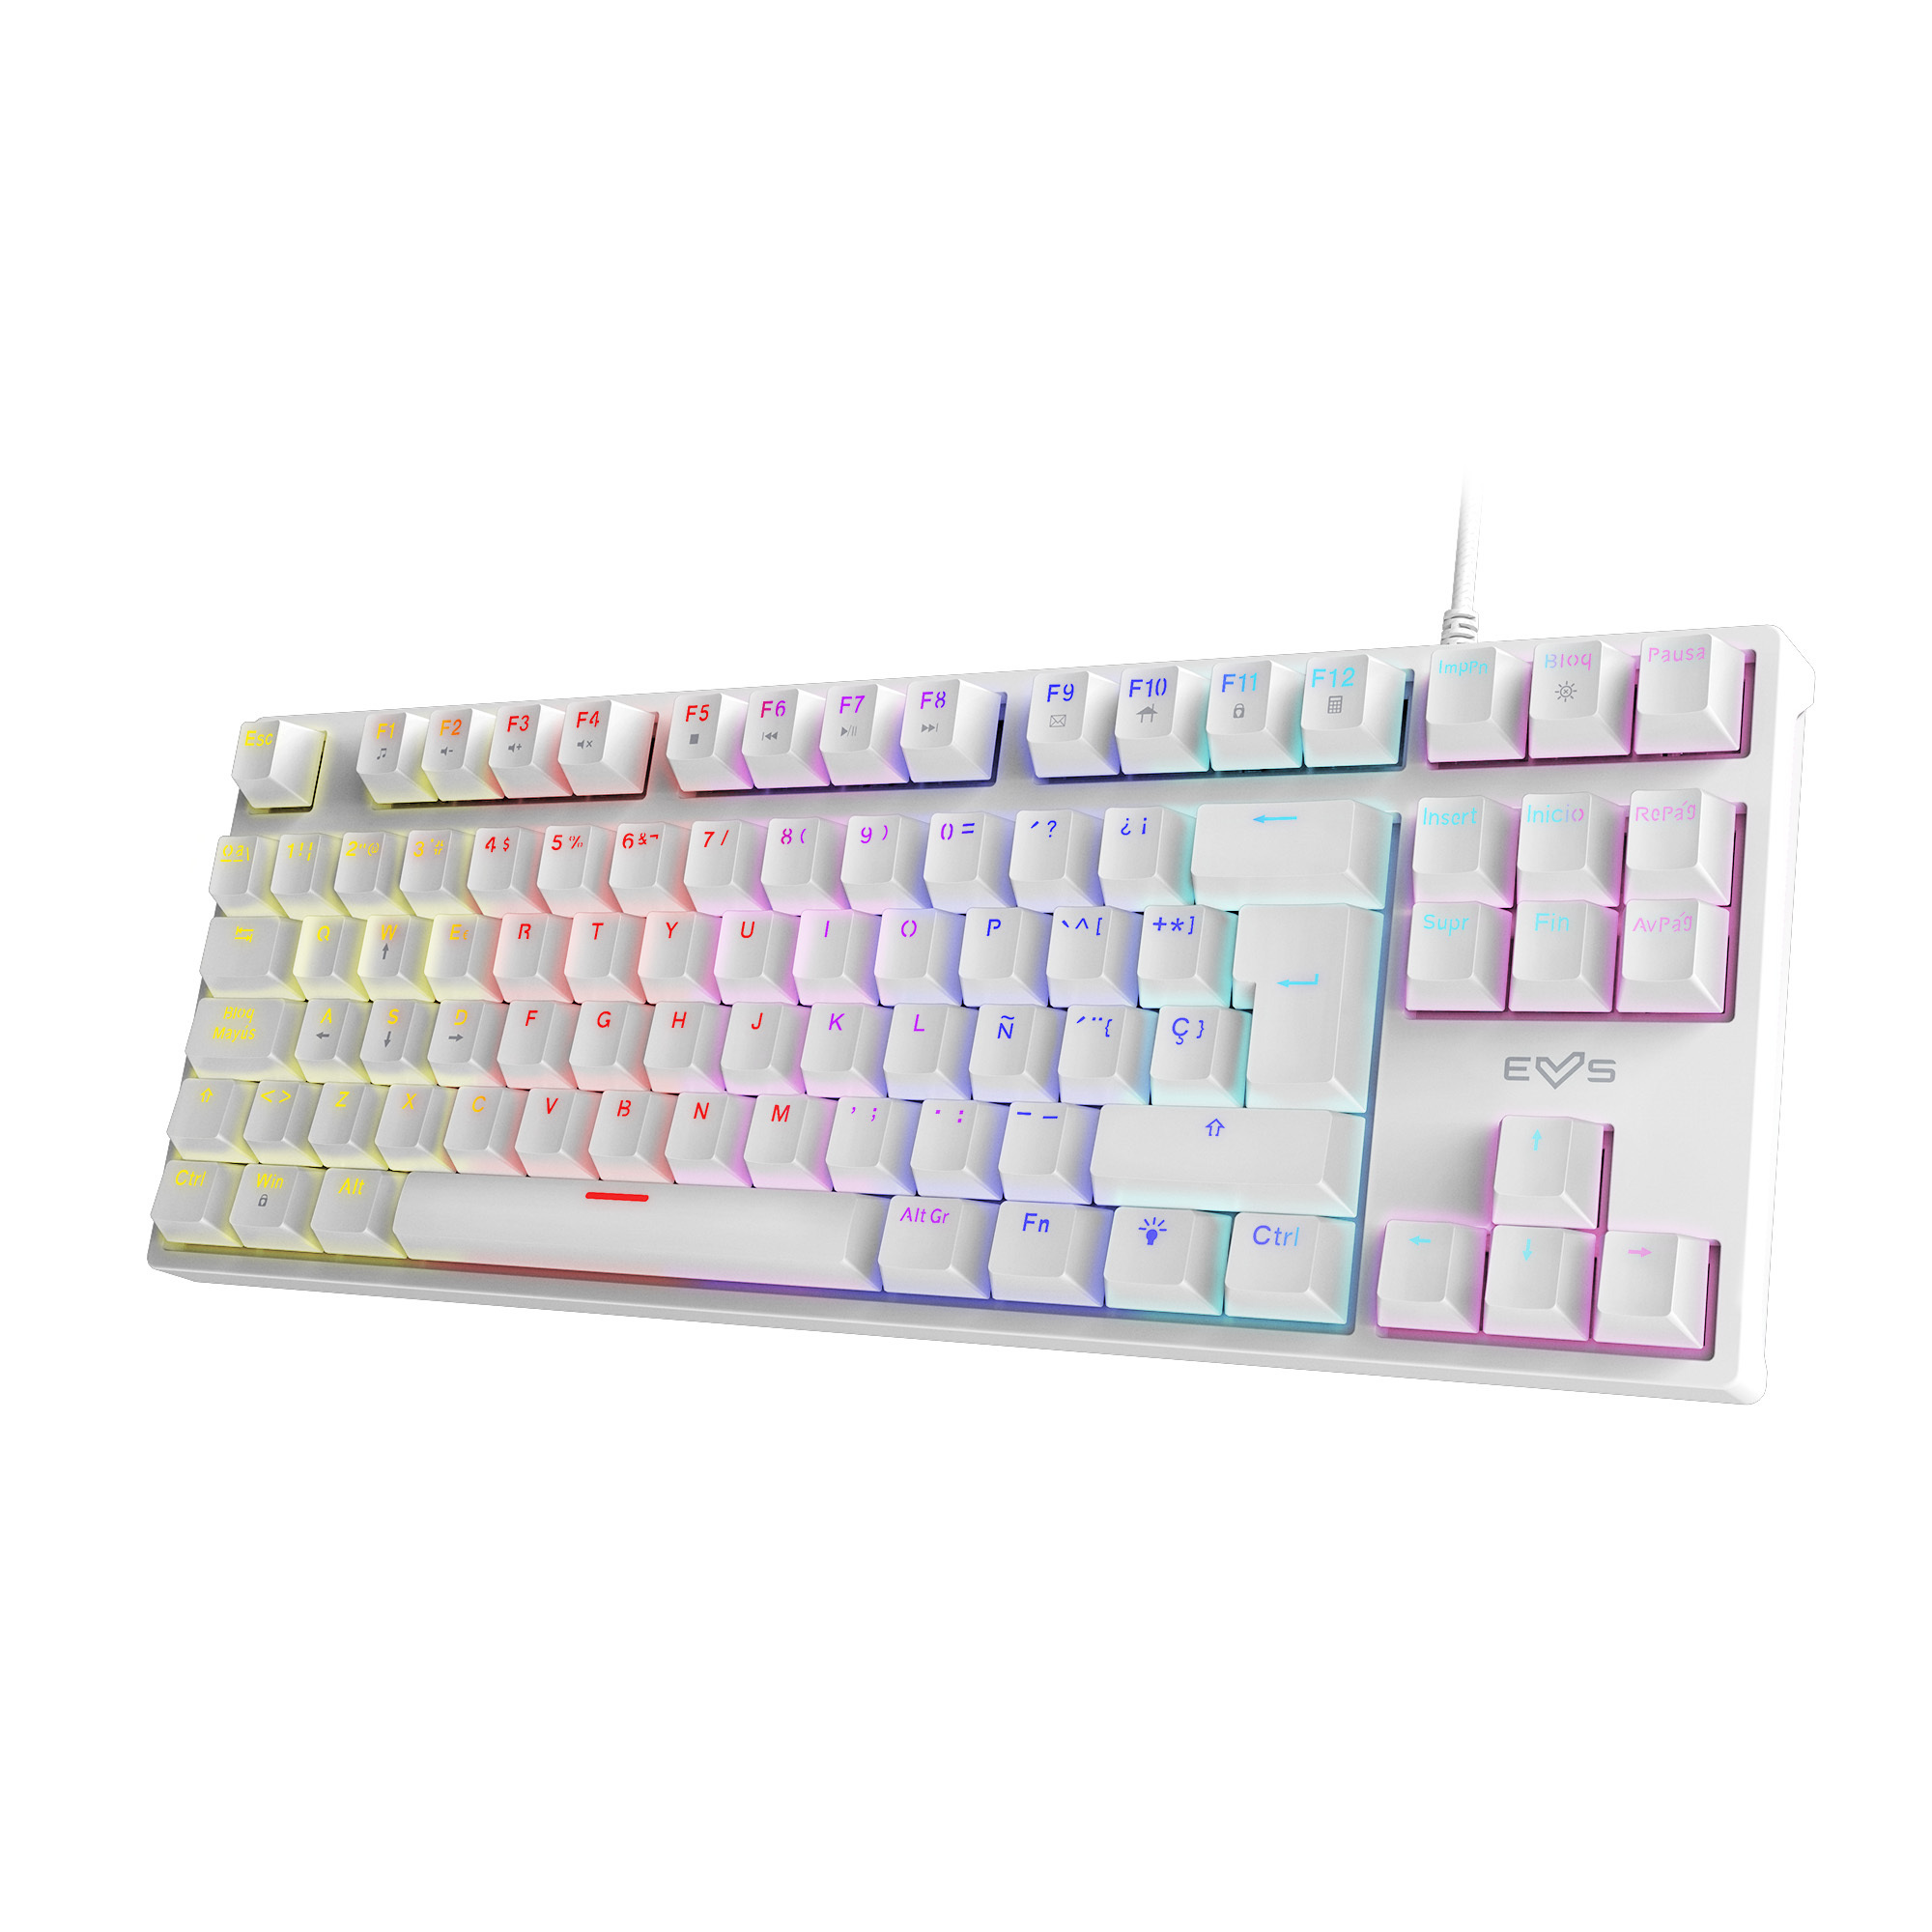 Clavier gamer blanc avec touches silencieuses rouges